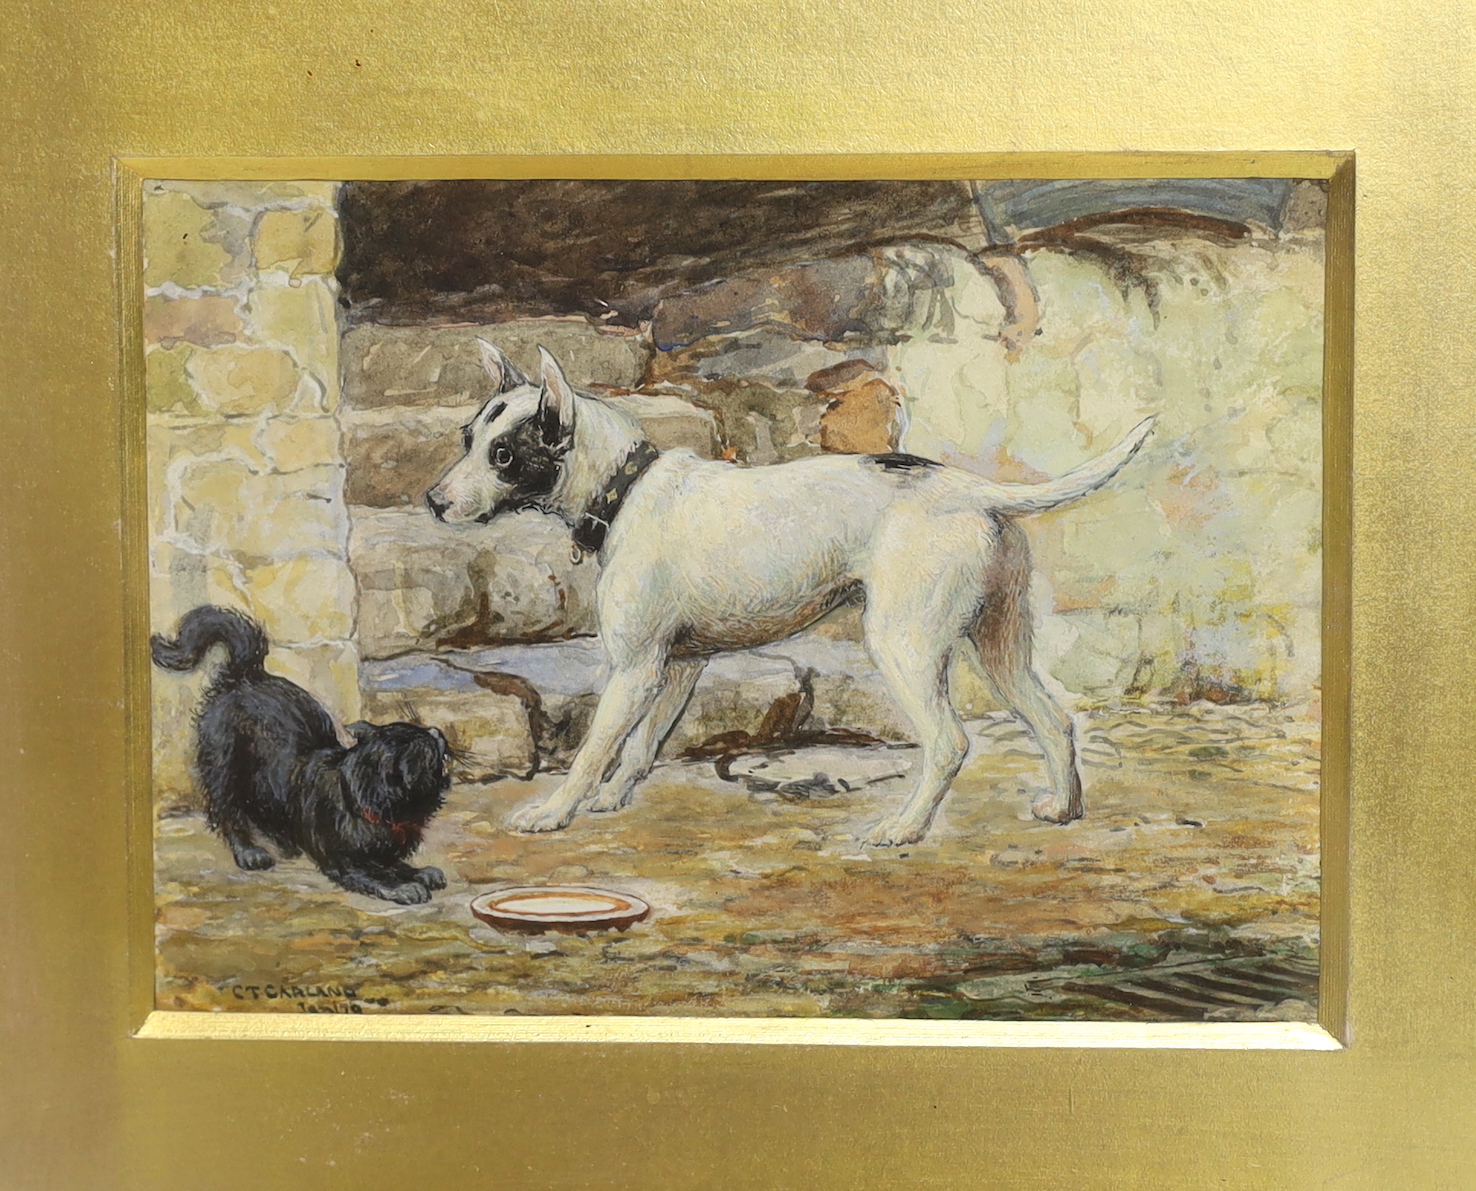 Charles Trevor Garland (1851-1906), two watercolours, Dog and cat and Boy angler, one signed and dated Jan '79, largest 12 x 17cm. Condition - fair